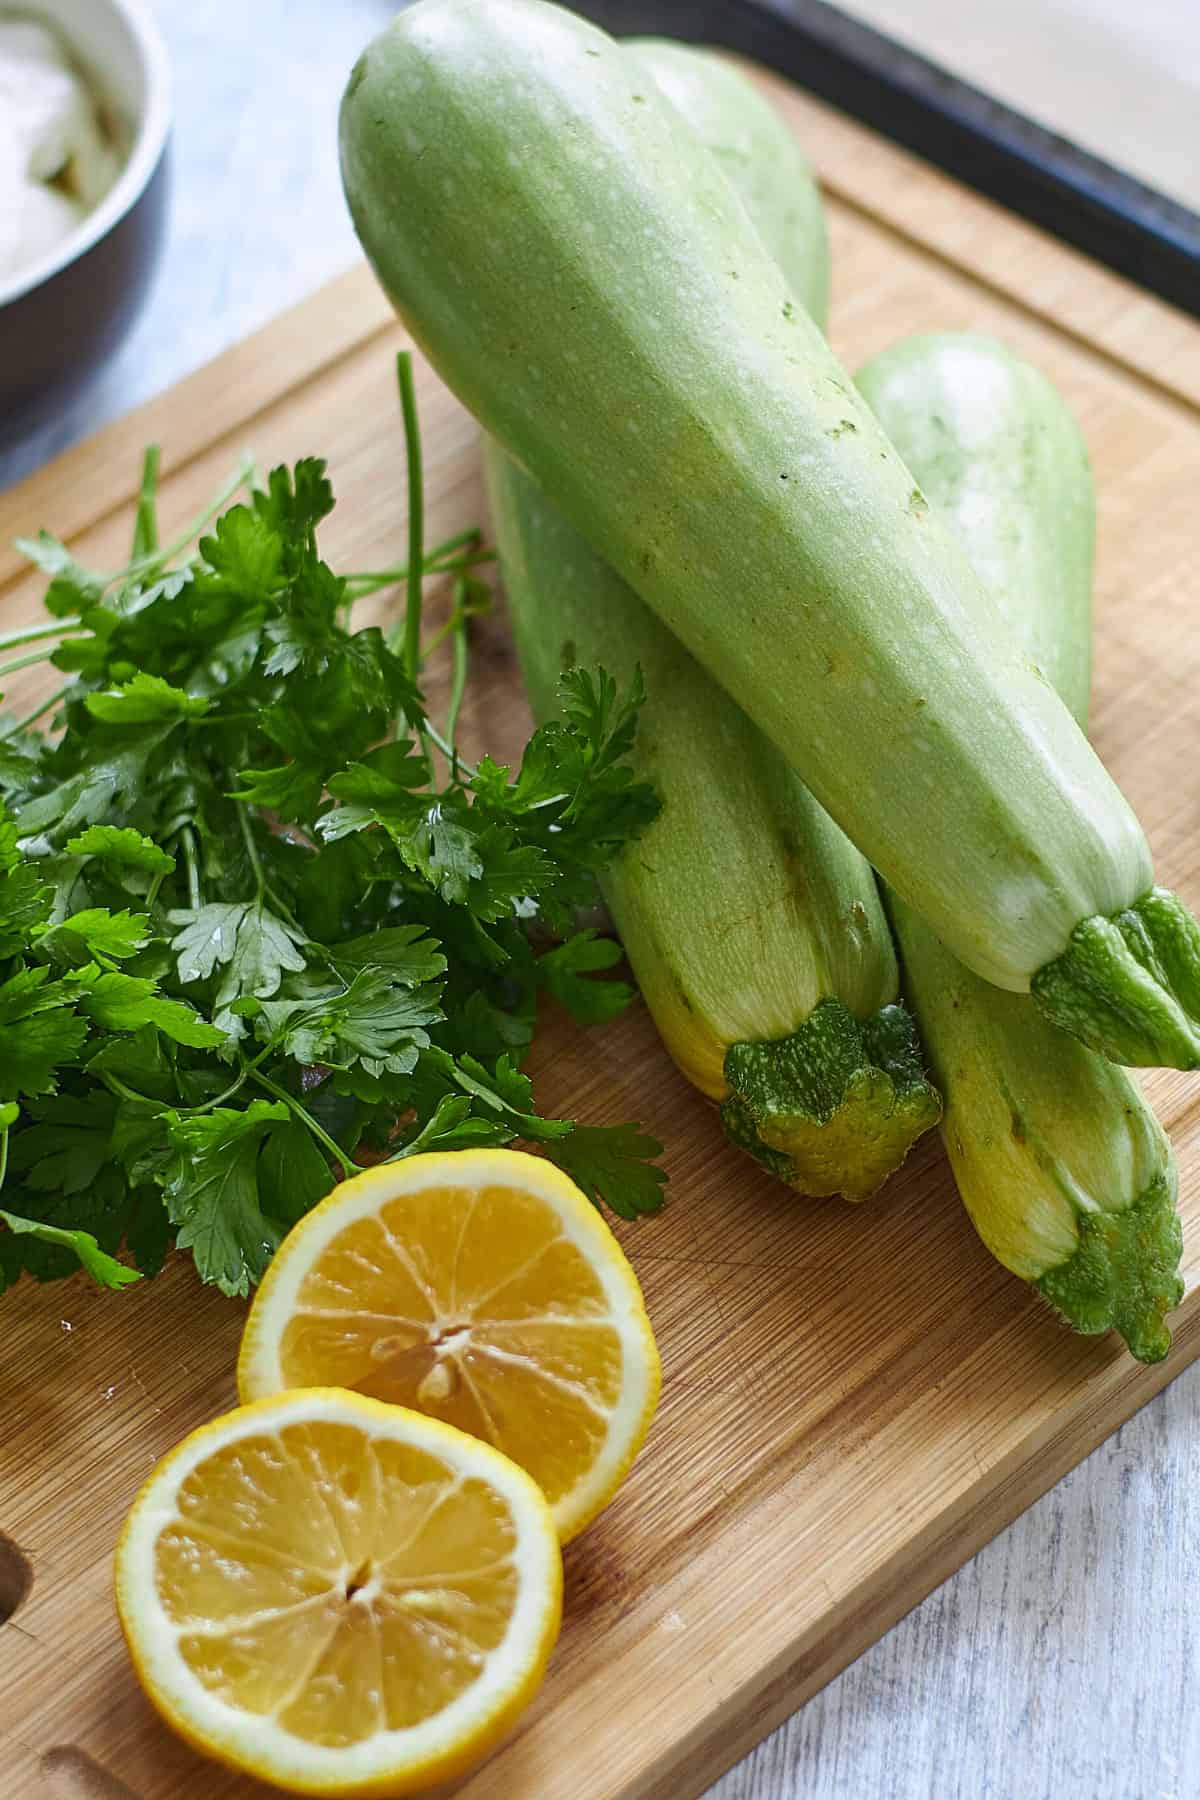 wooden cutting board with zucchini, parsley, and sliced lemon.